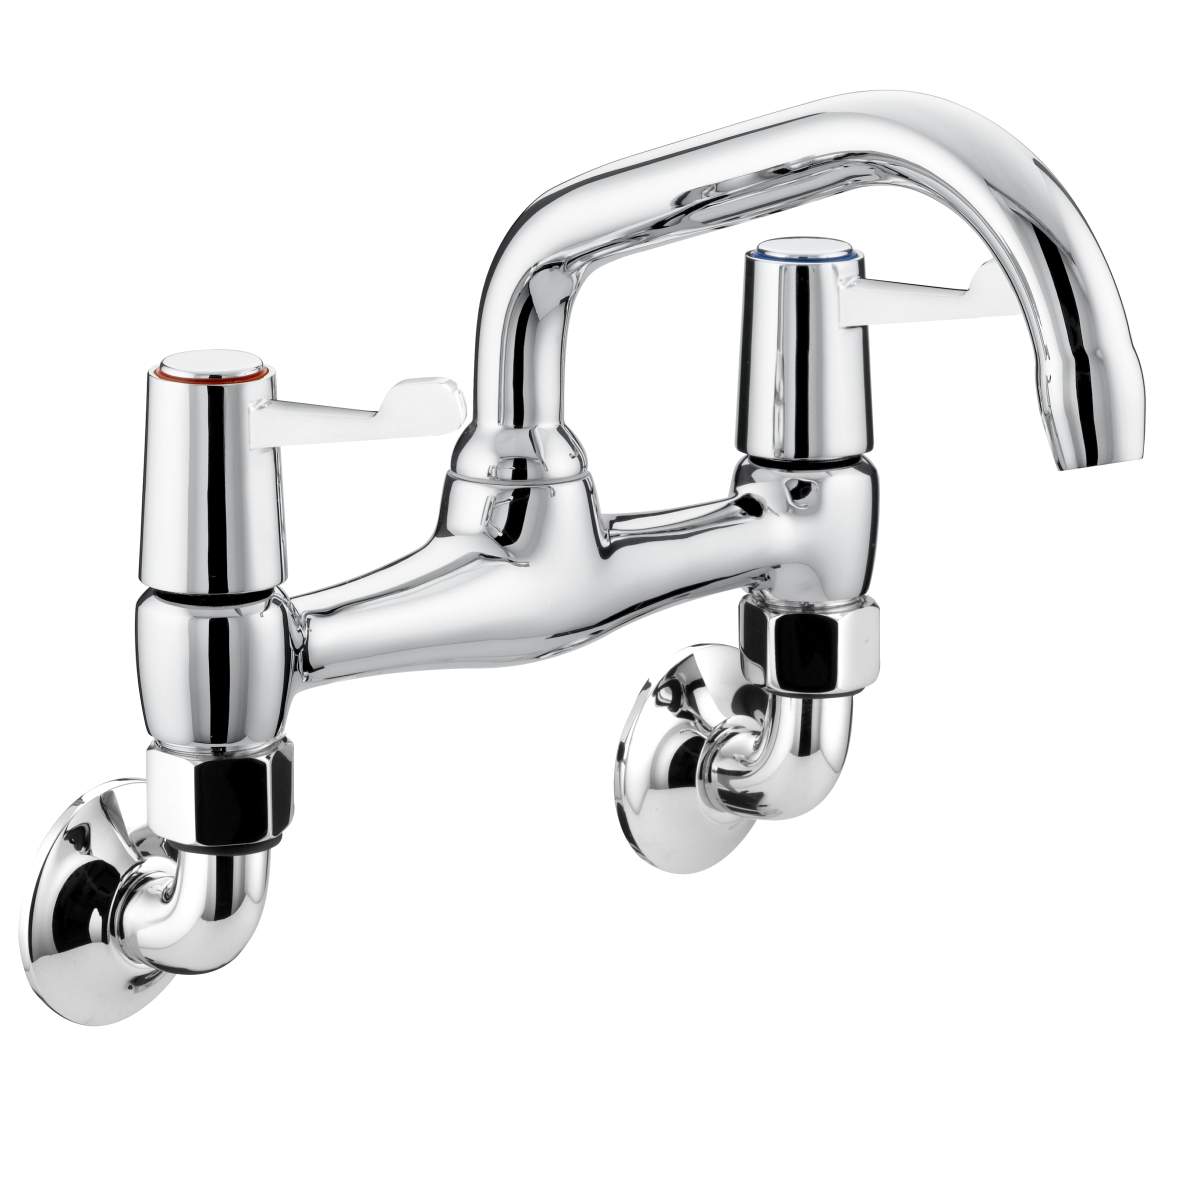 Bristan Wall Mounted Sink Mixer with 3'' (76Mm) Levers (VAL2 WMSNK C CD)